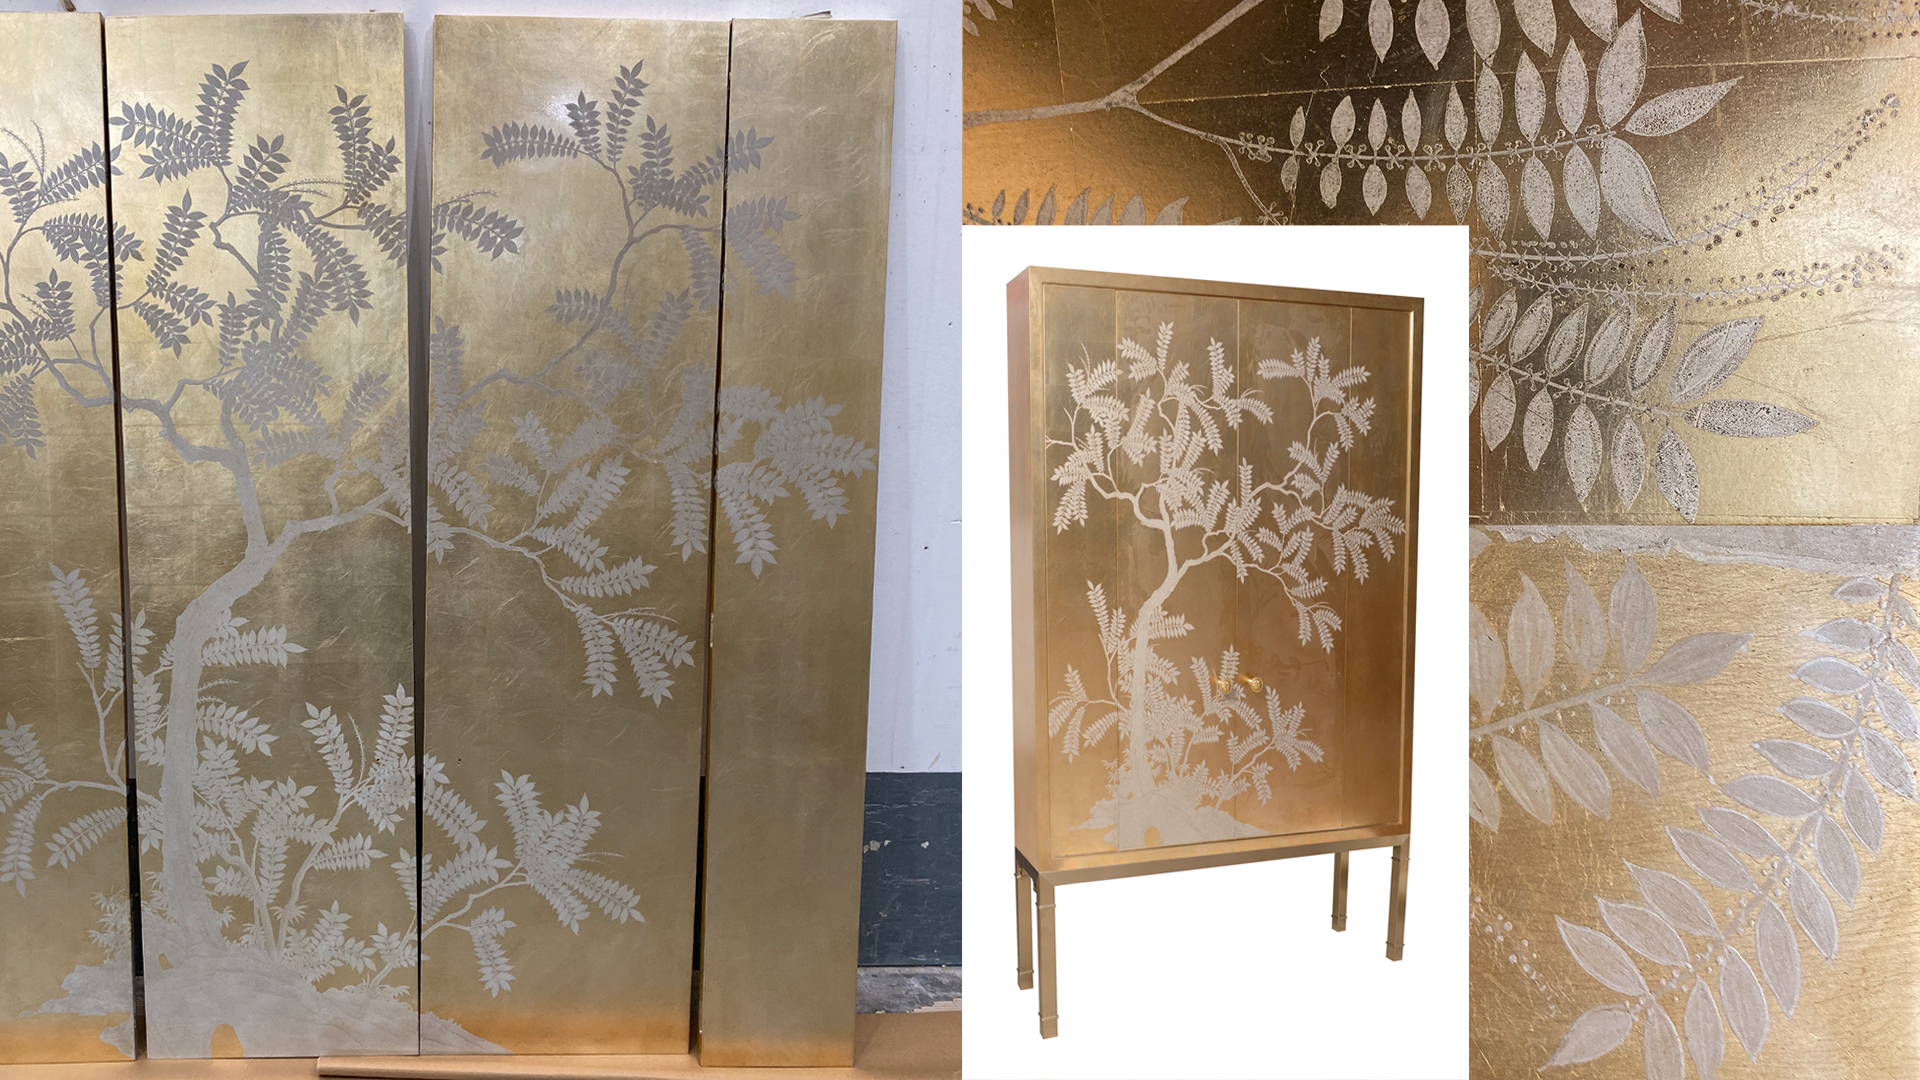 Golden leaves with white hand-painted cherry tree finishes can be seen on the hand-painted doors of the mini-bar pictured above.